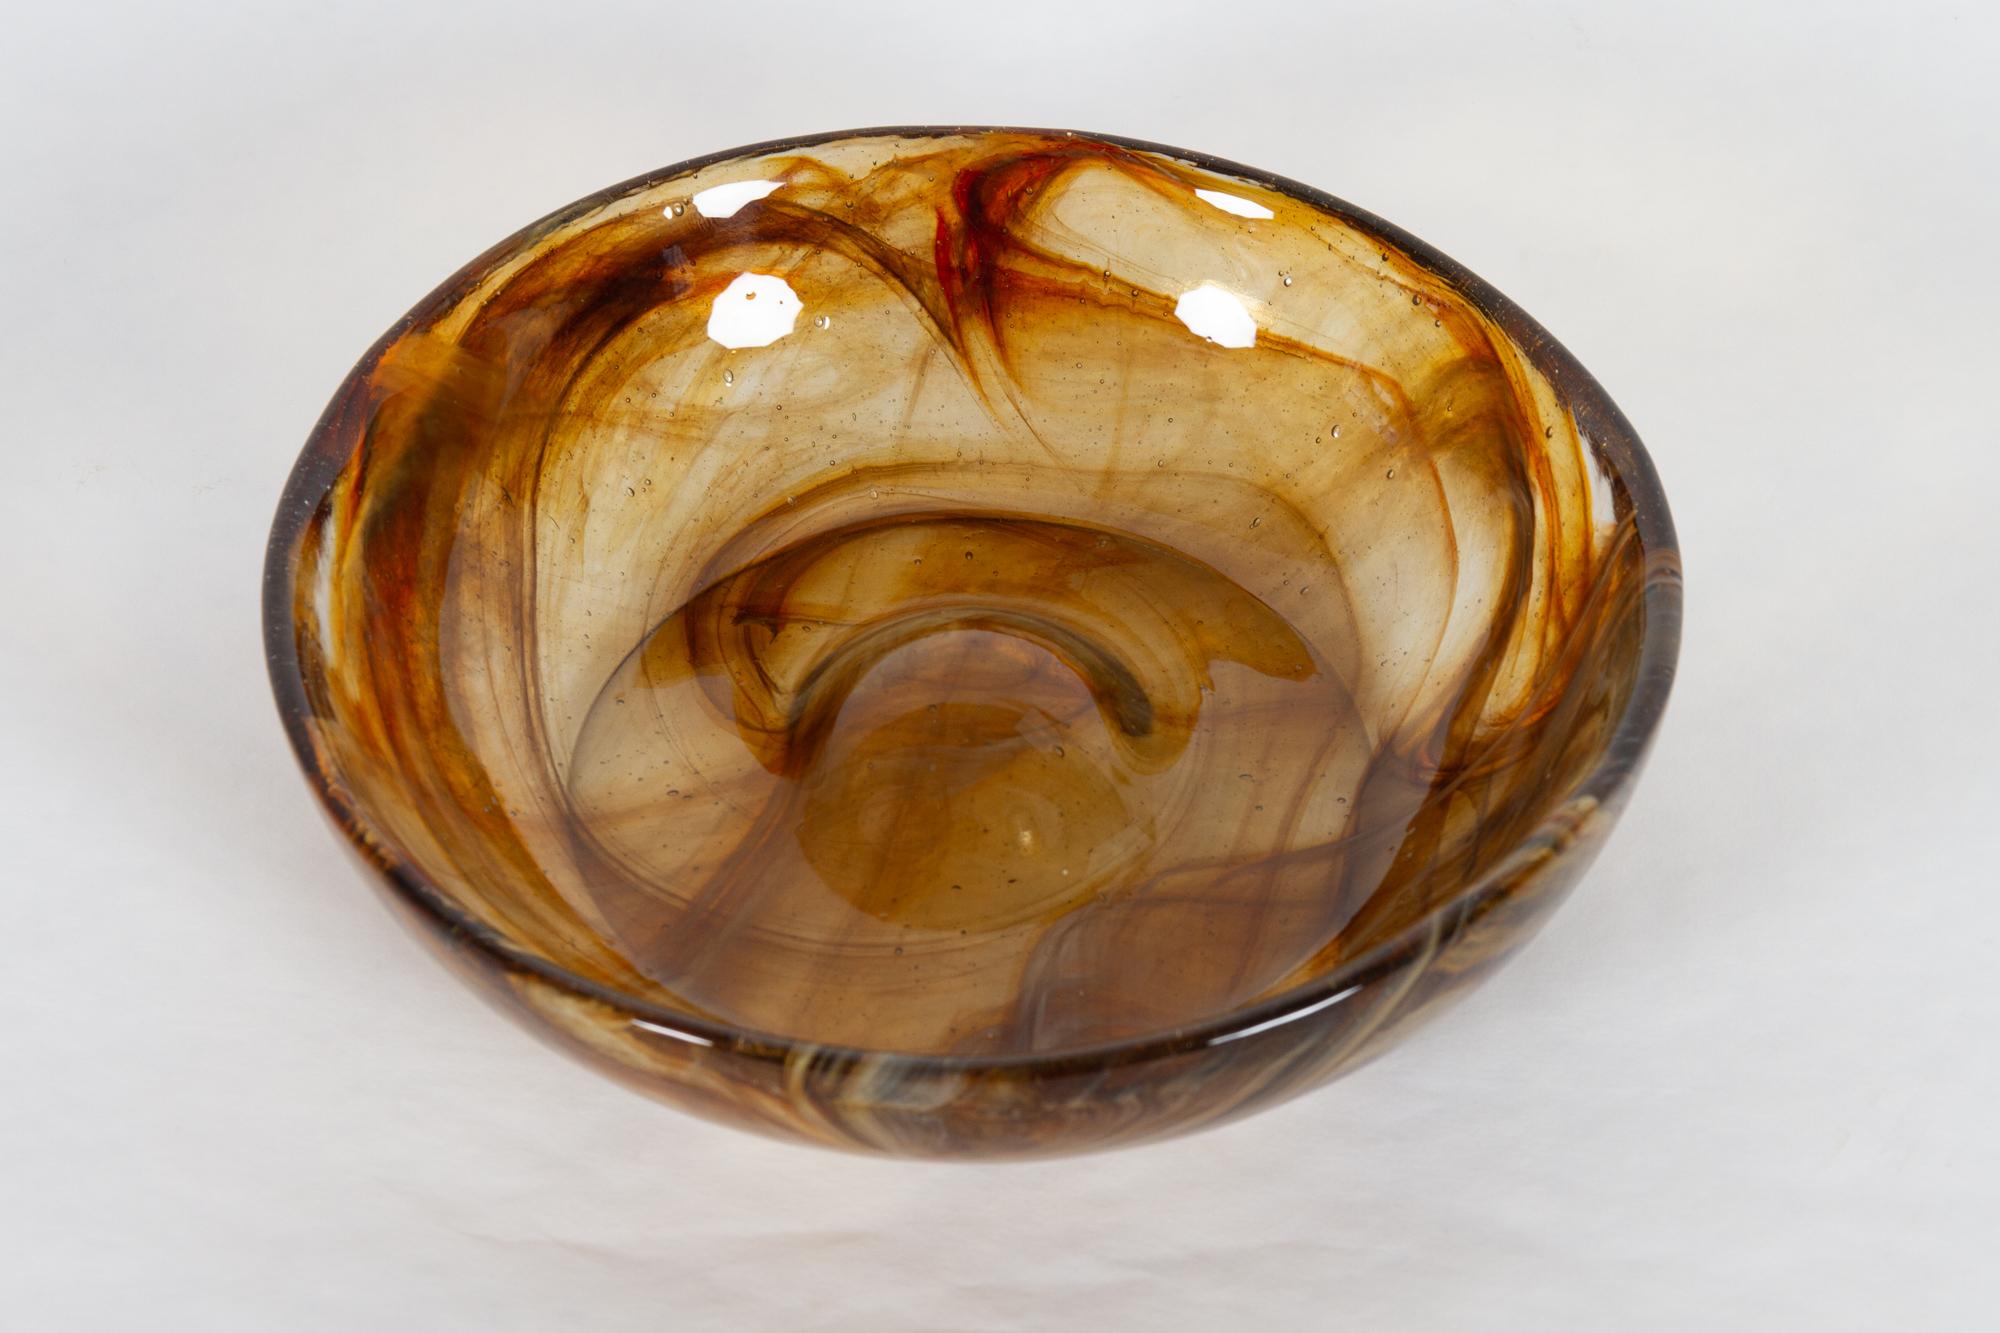 Vintage Danish glass pipe ashtray, 1970s
Large Danish ashtray for pipes designed by Michael Bang for Kastrup / Holmegaard Glassworks, 1975.
Made in three sizes. This is the largest with a diameter of 19.5 cm. This was one of the first
pieces of